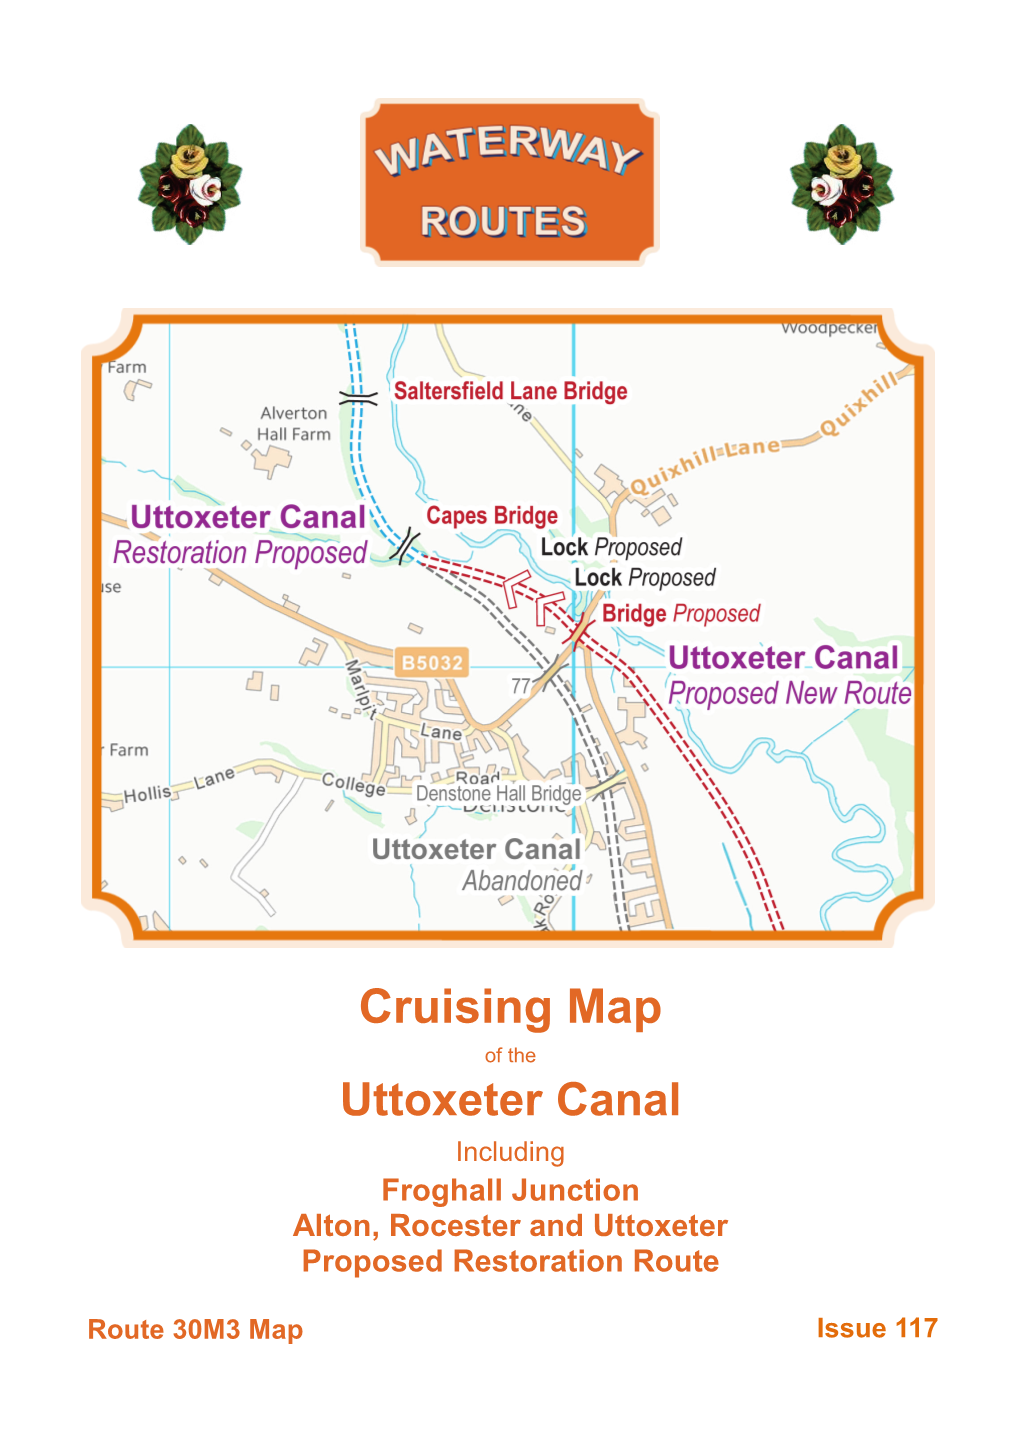 Cruising Map of the Uttoxeter Canal Including Froghall Junction Alton, Rocester and Uttoxeter Proposed Restoration Route